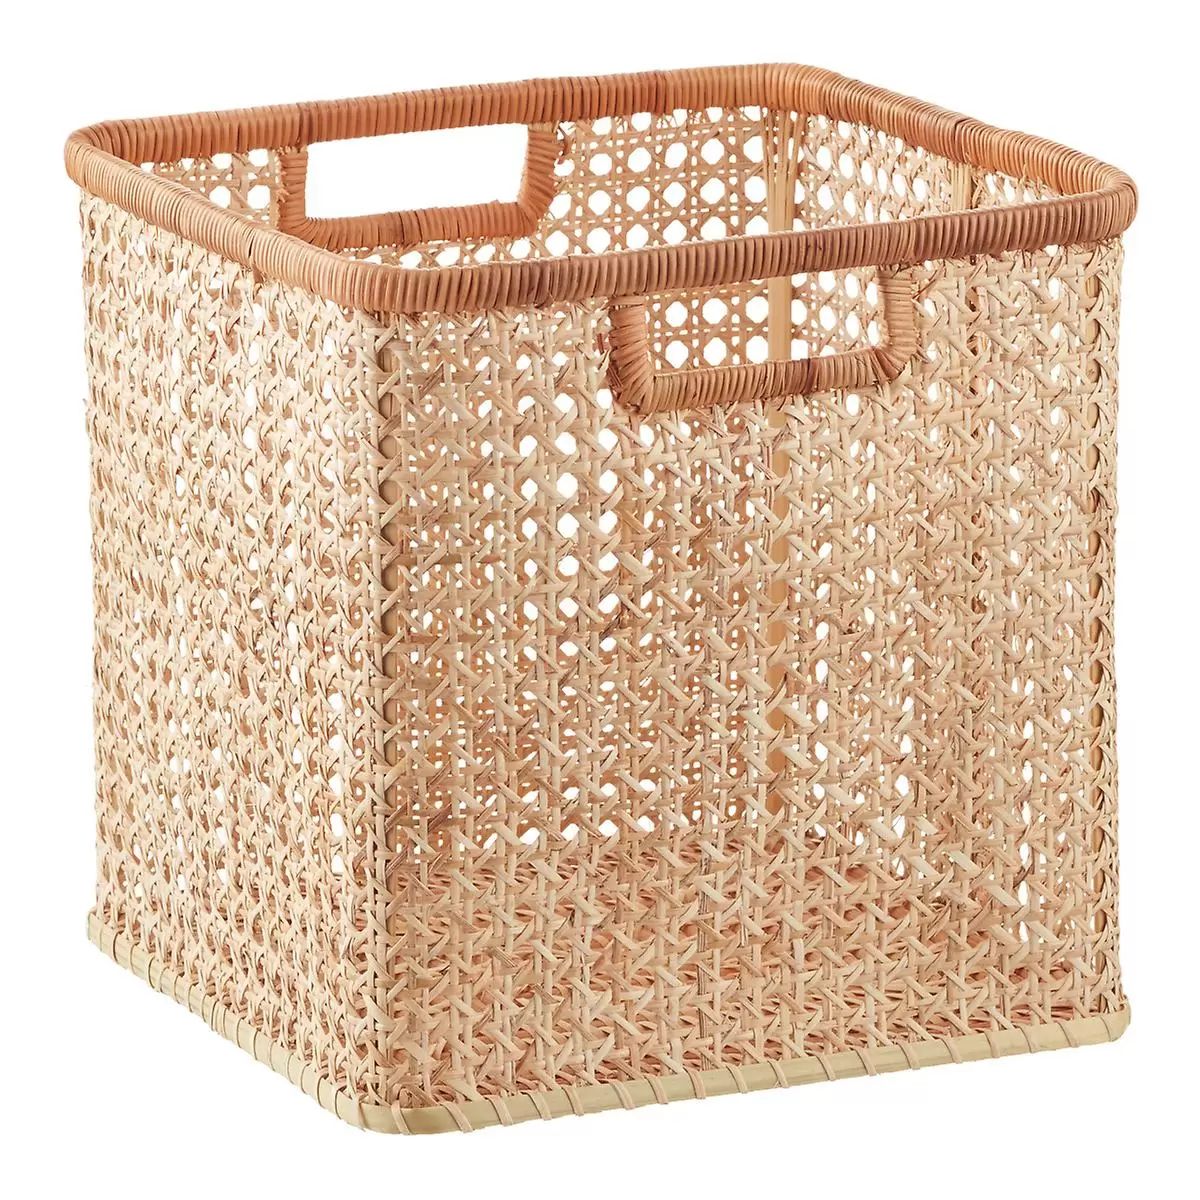 The Container Store Large Albany Rattan Cane Cube NaturalBy The Container Store0.0No Reviews$49.9... | The Container Store